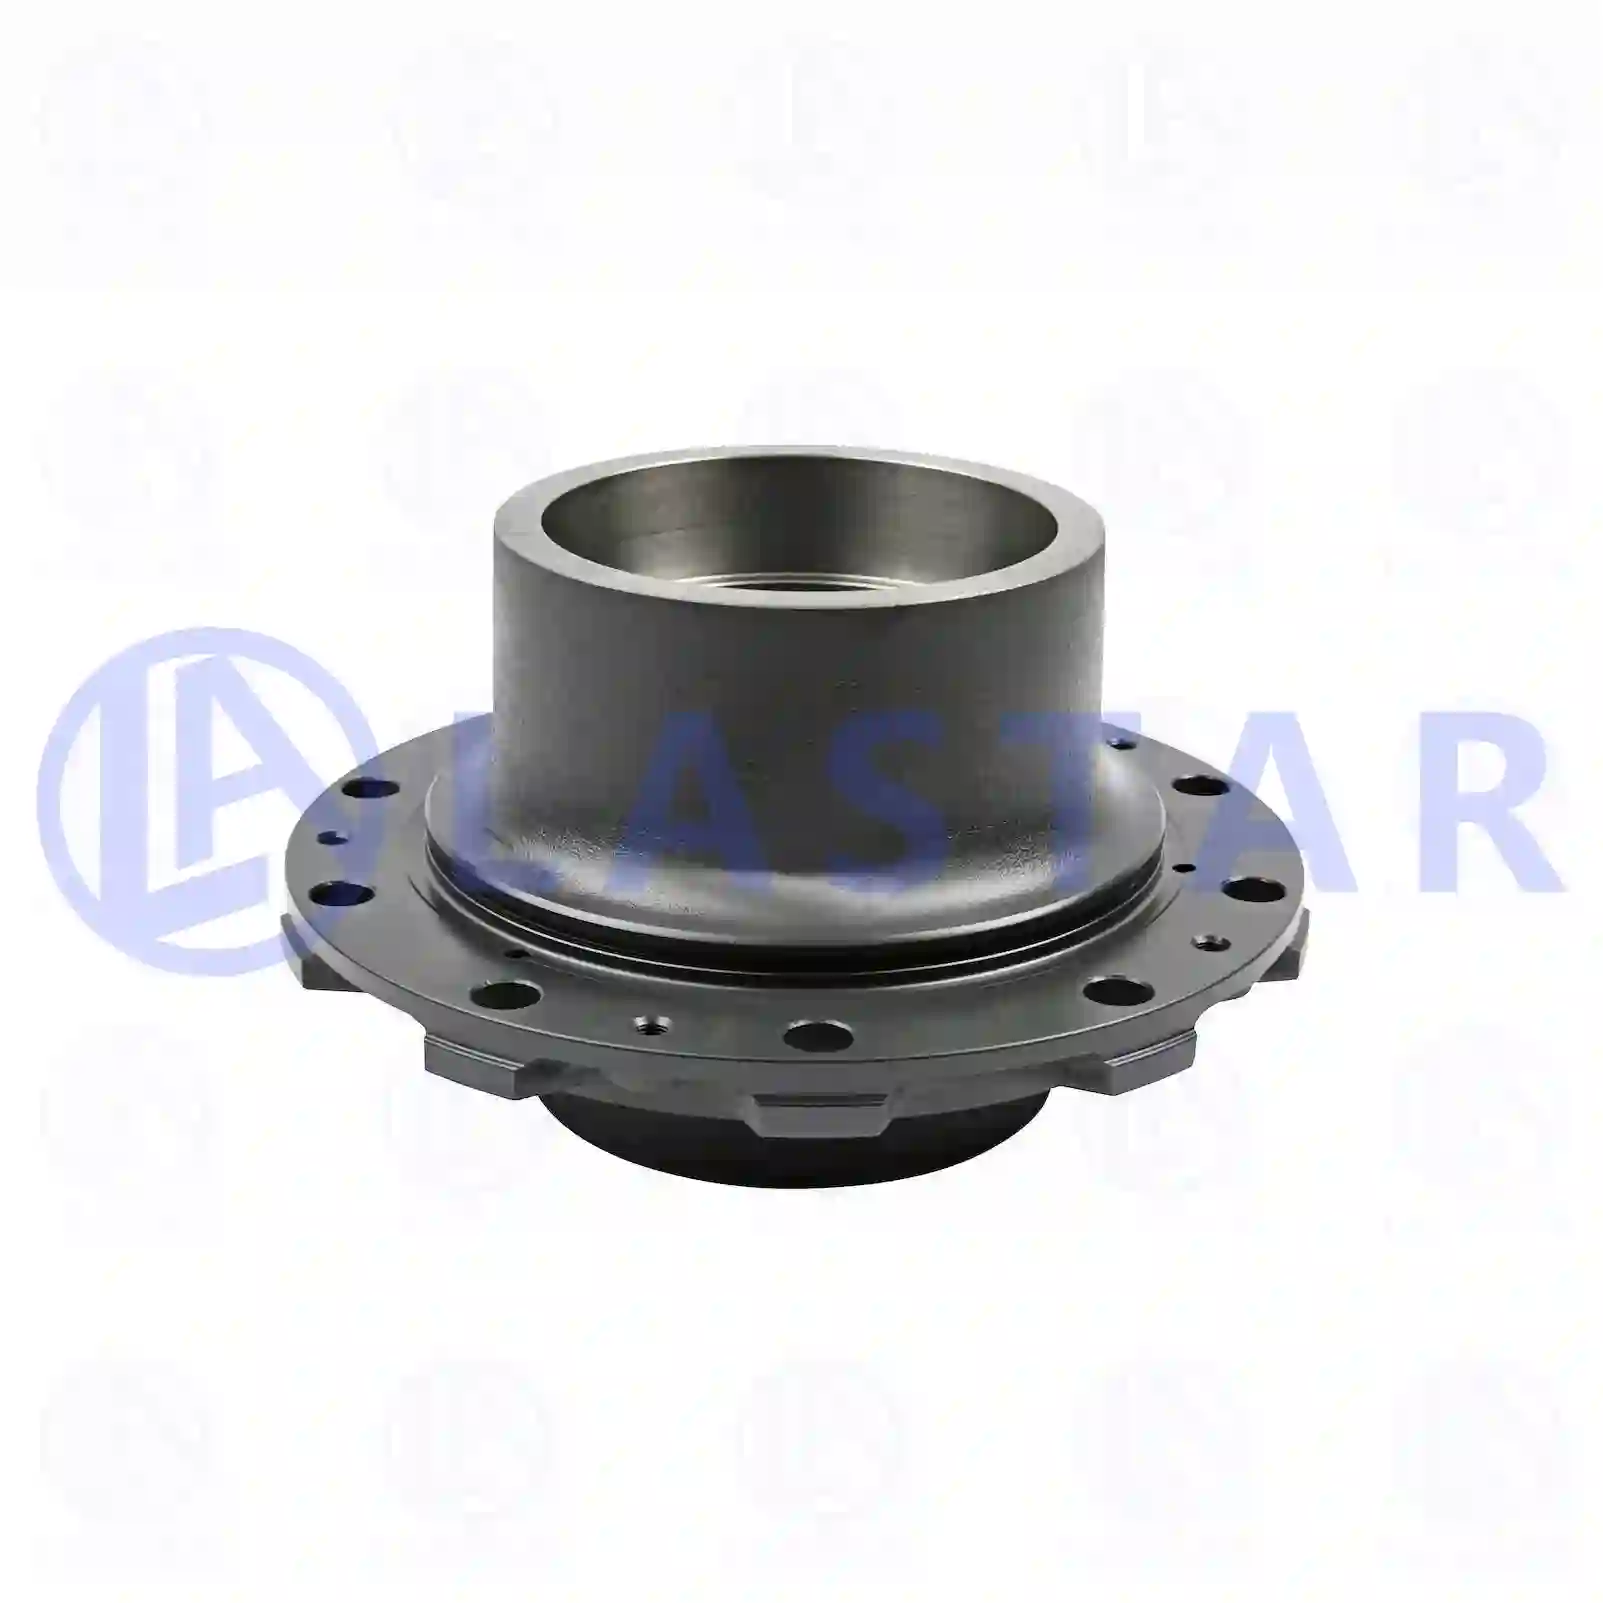 Wheel hub, without bearings, 77726322, 3463562801, 3463562901, 9423561701, , , ||  77726322 Lastar Spare Part | Truck Spare Parts, Auotomotive Spare Parts Wheel hub, without bearings, 77726322, 3463562801, 3463562901, 9423561701, , , ||  77726322 Lastar Spare Part | Truck Spare Parts, Auotomotive Spare Parts